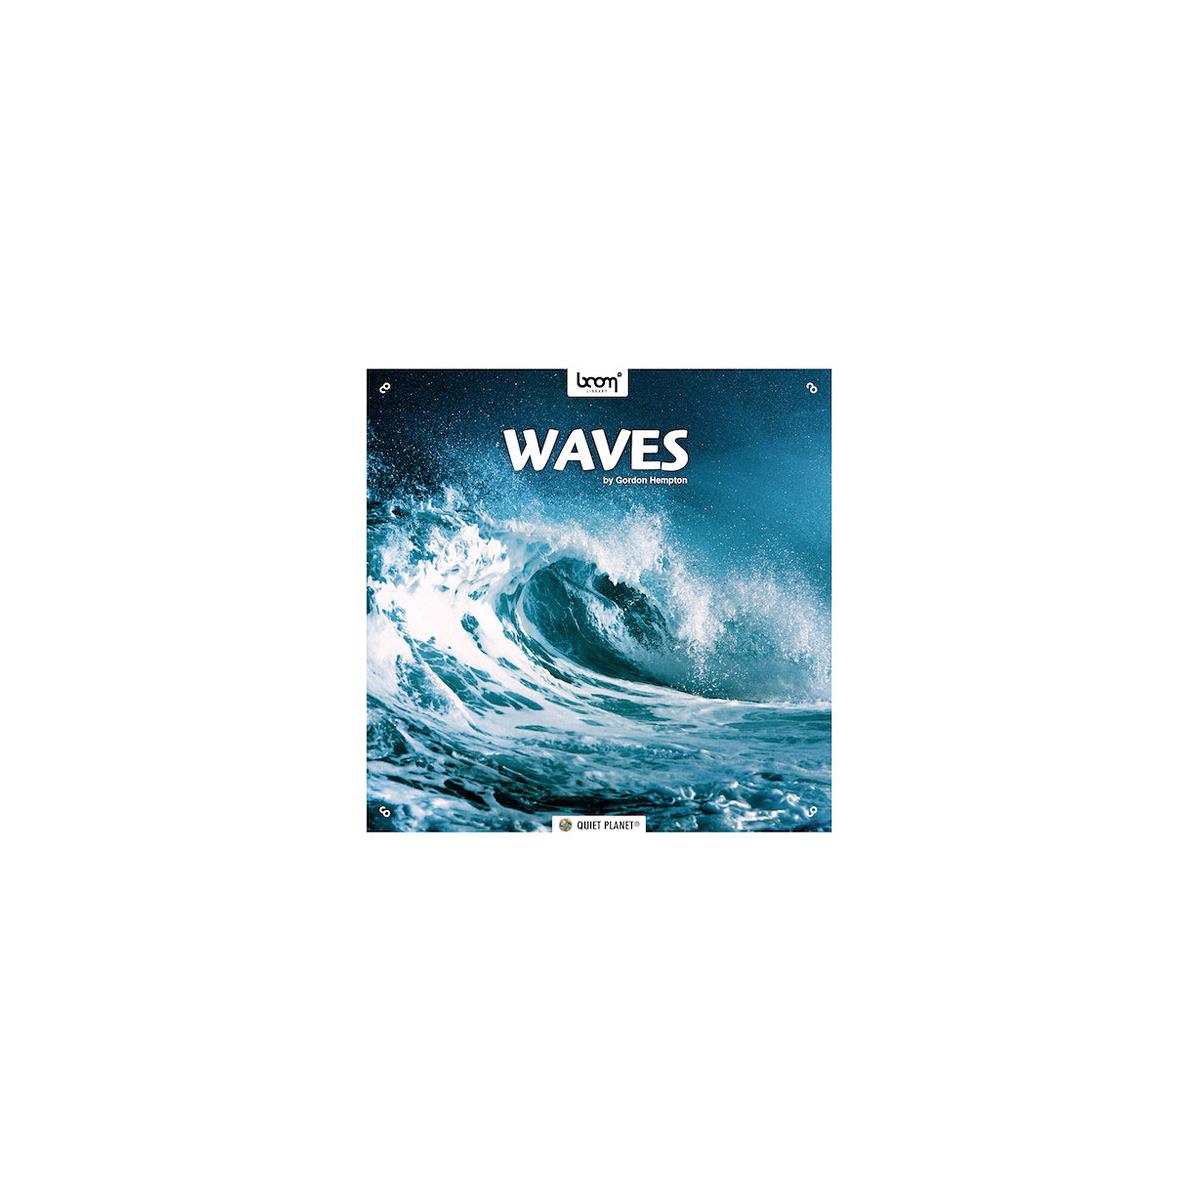 Image of Sound Ideas Waves Sound Effects DVD